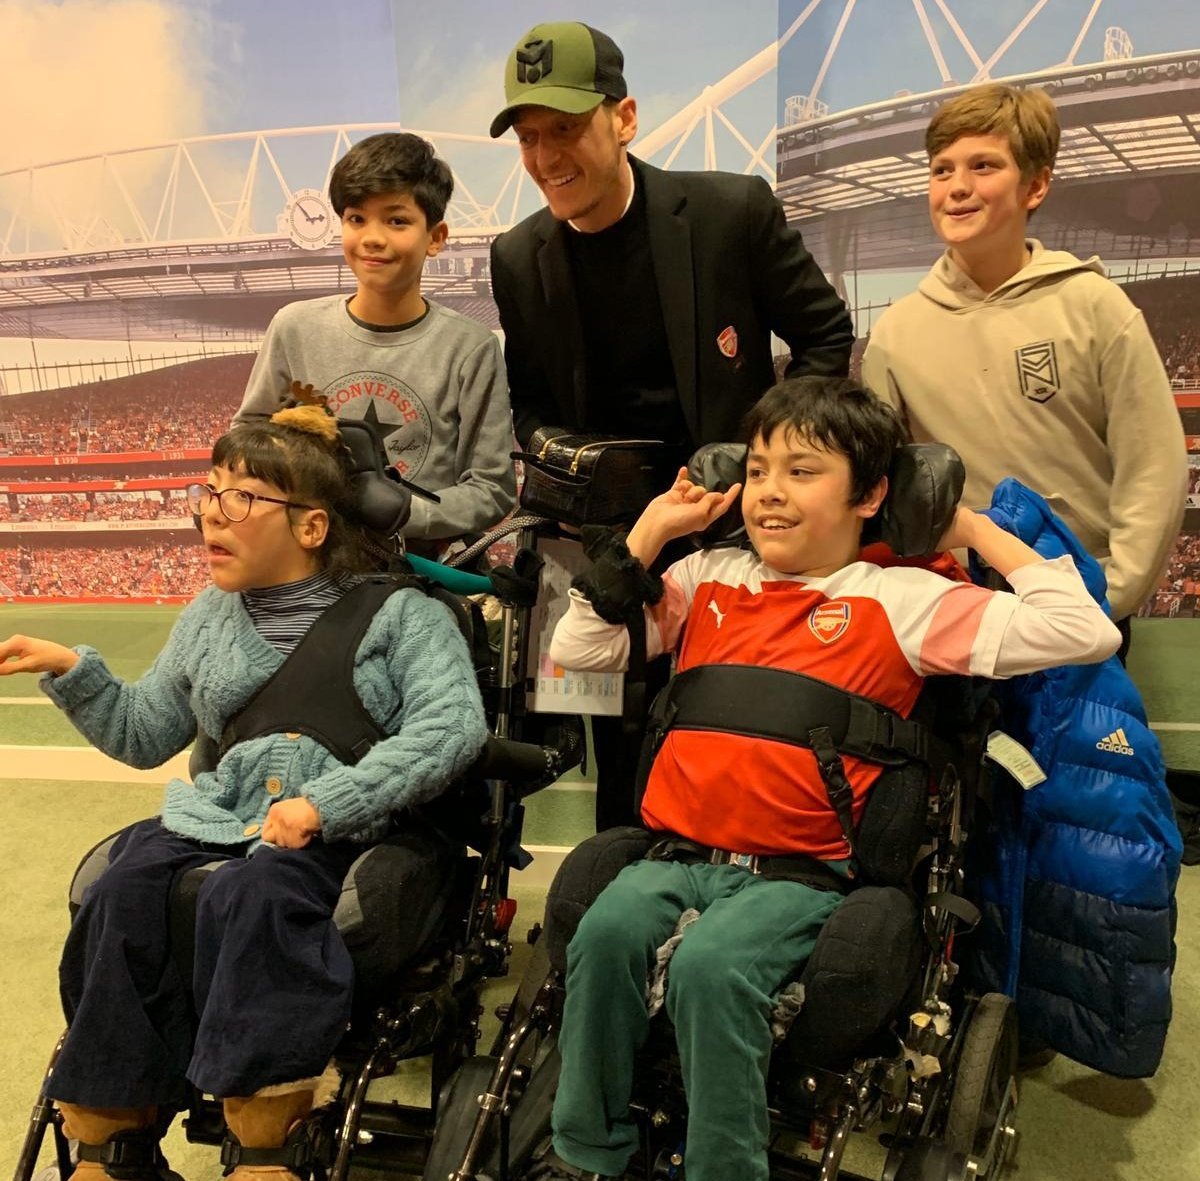 Mesut Ozil visits with fans after Arsenal's match with Newcastle (via Mesut Ozil Twitter @MesutOzil1088)